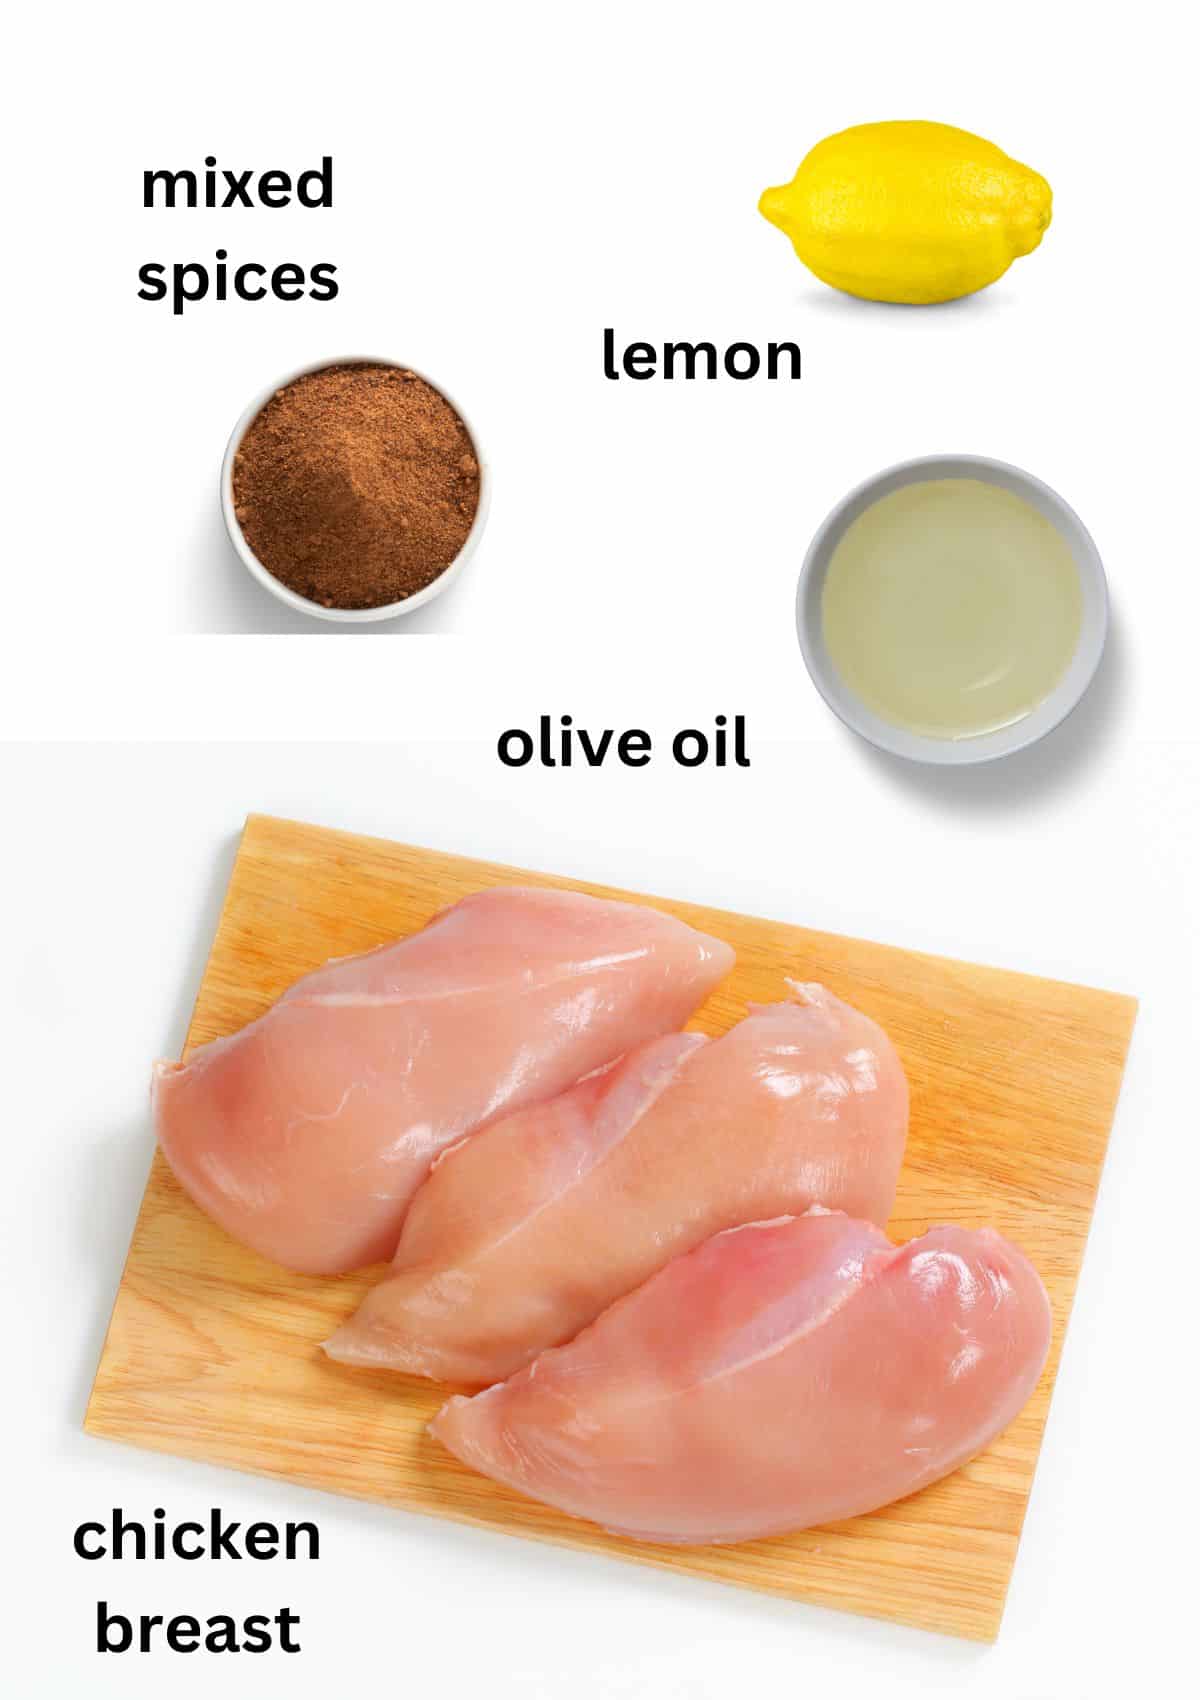 raw chicken breast on a wooden board, olive oil and spices in bowls and a lemon.